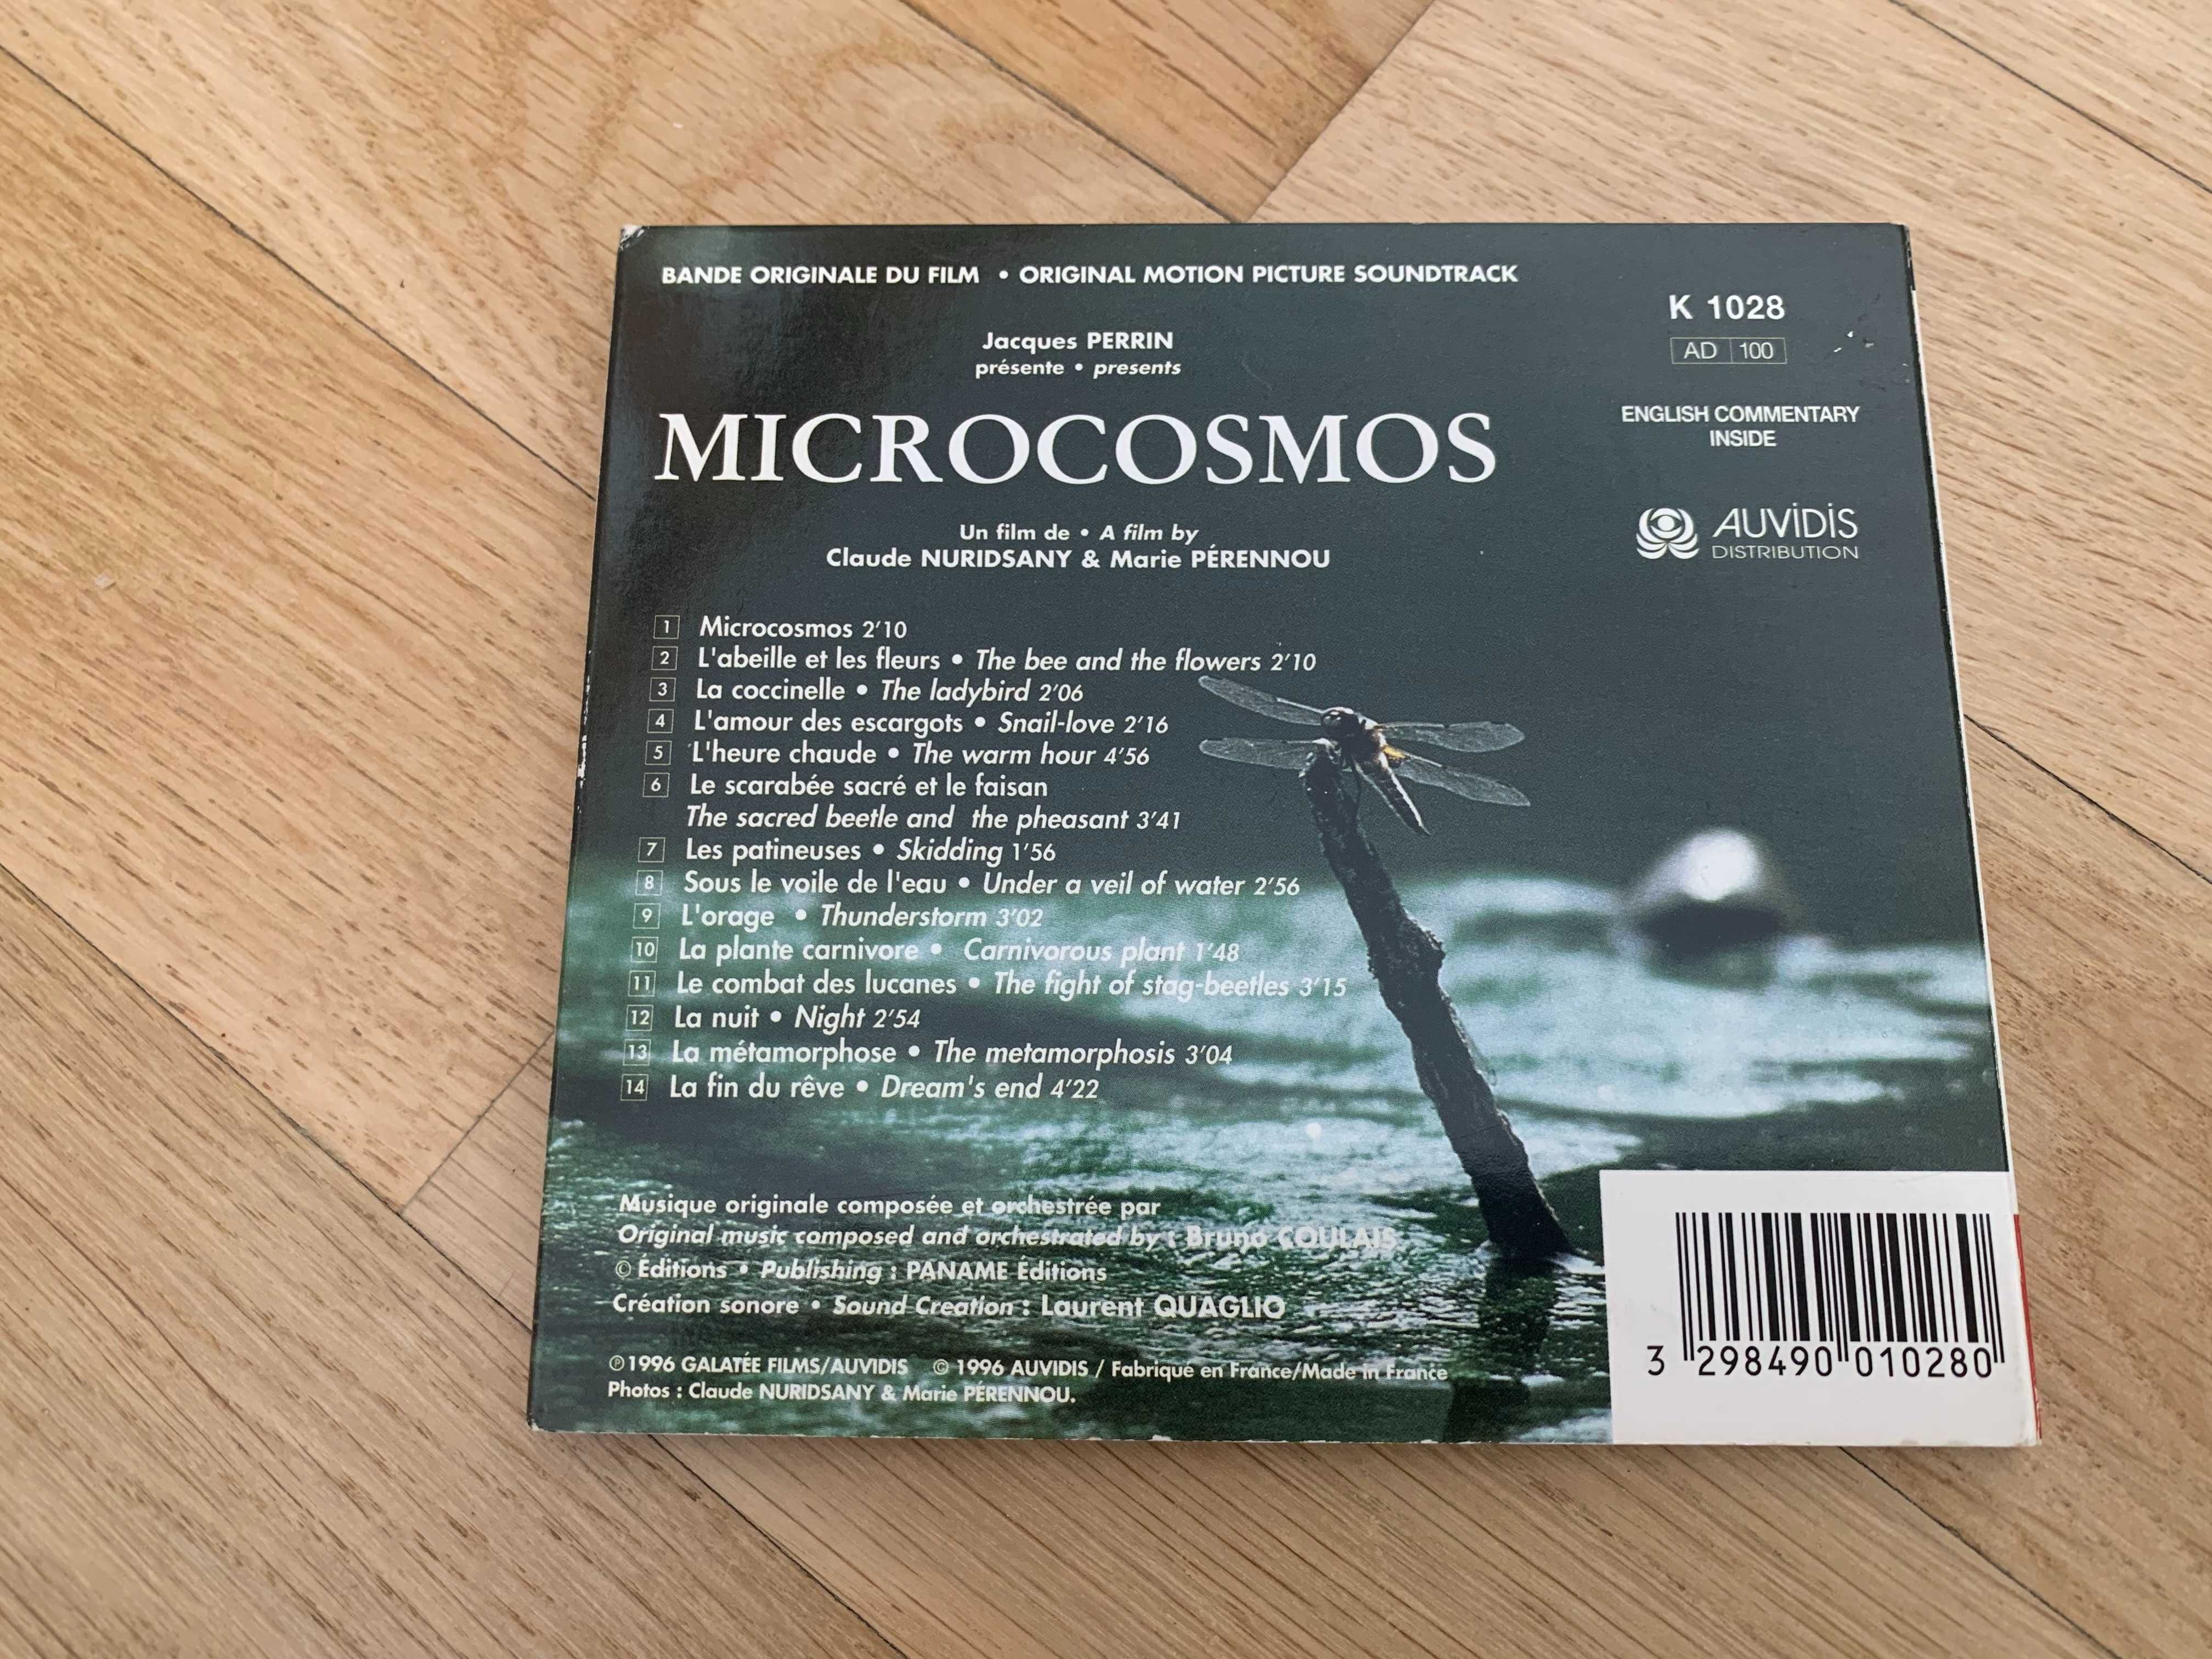 Microcosmos - Music from the Original Motion Picture - Soundtrack CD